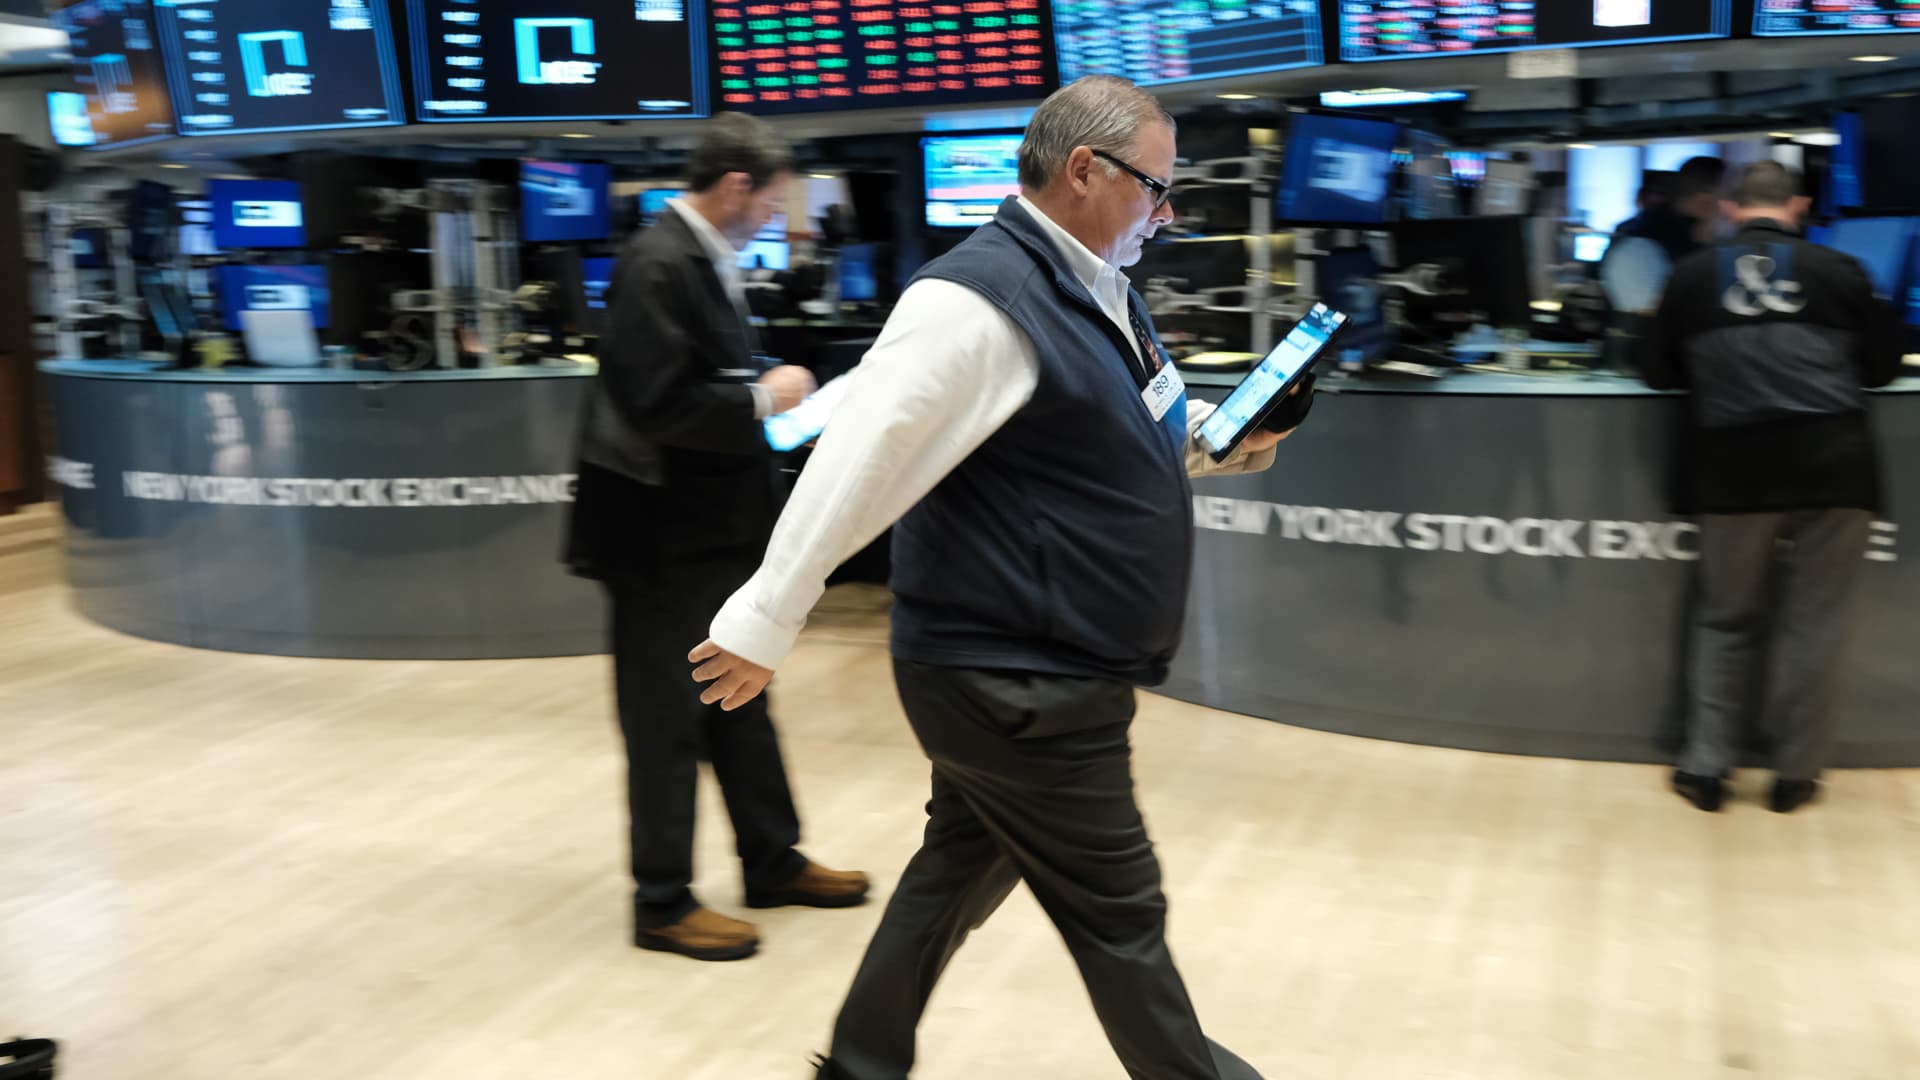 Stock futures are flat on Wednesday after two-day market rally ends